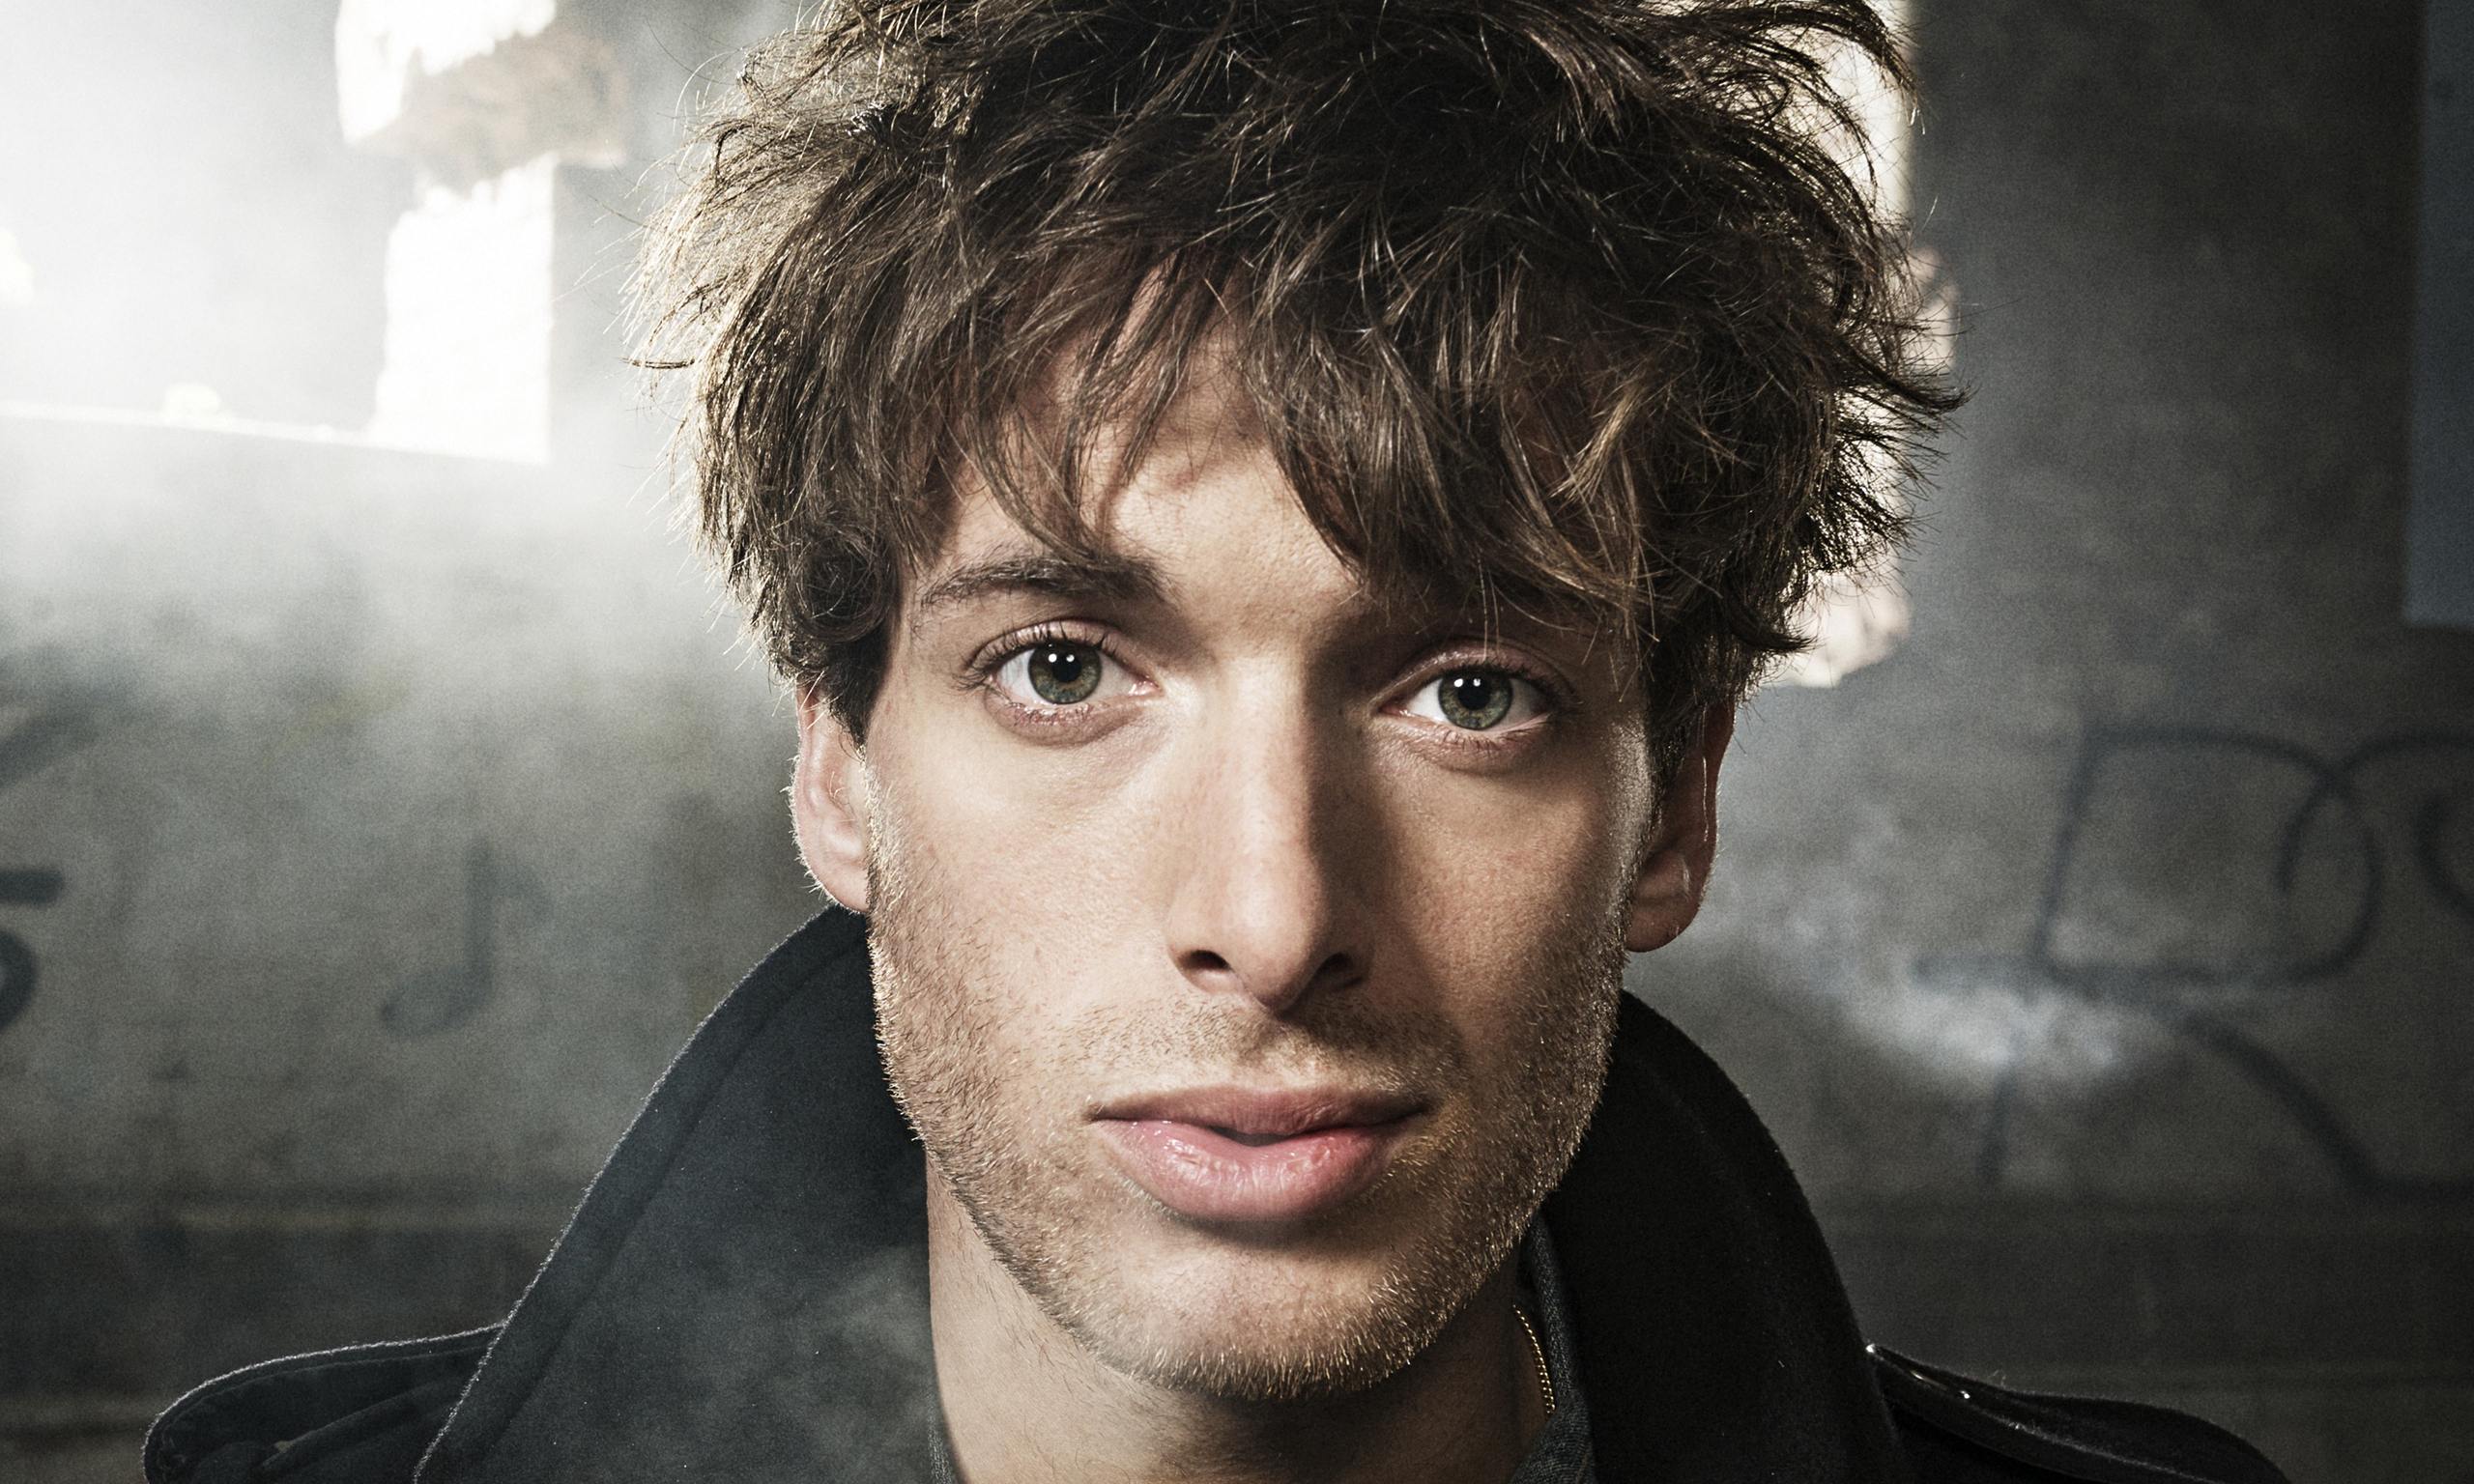 Paolo Nutini Backgrounds, Compatible - PC, Mobile, Gadgets| 2560x1536 px